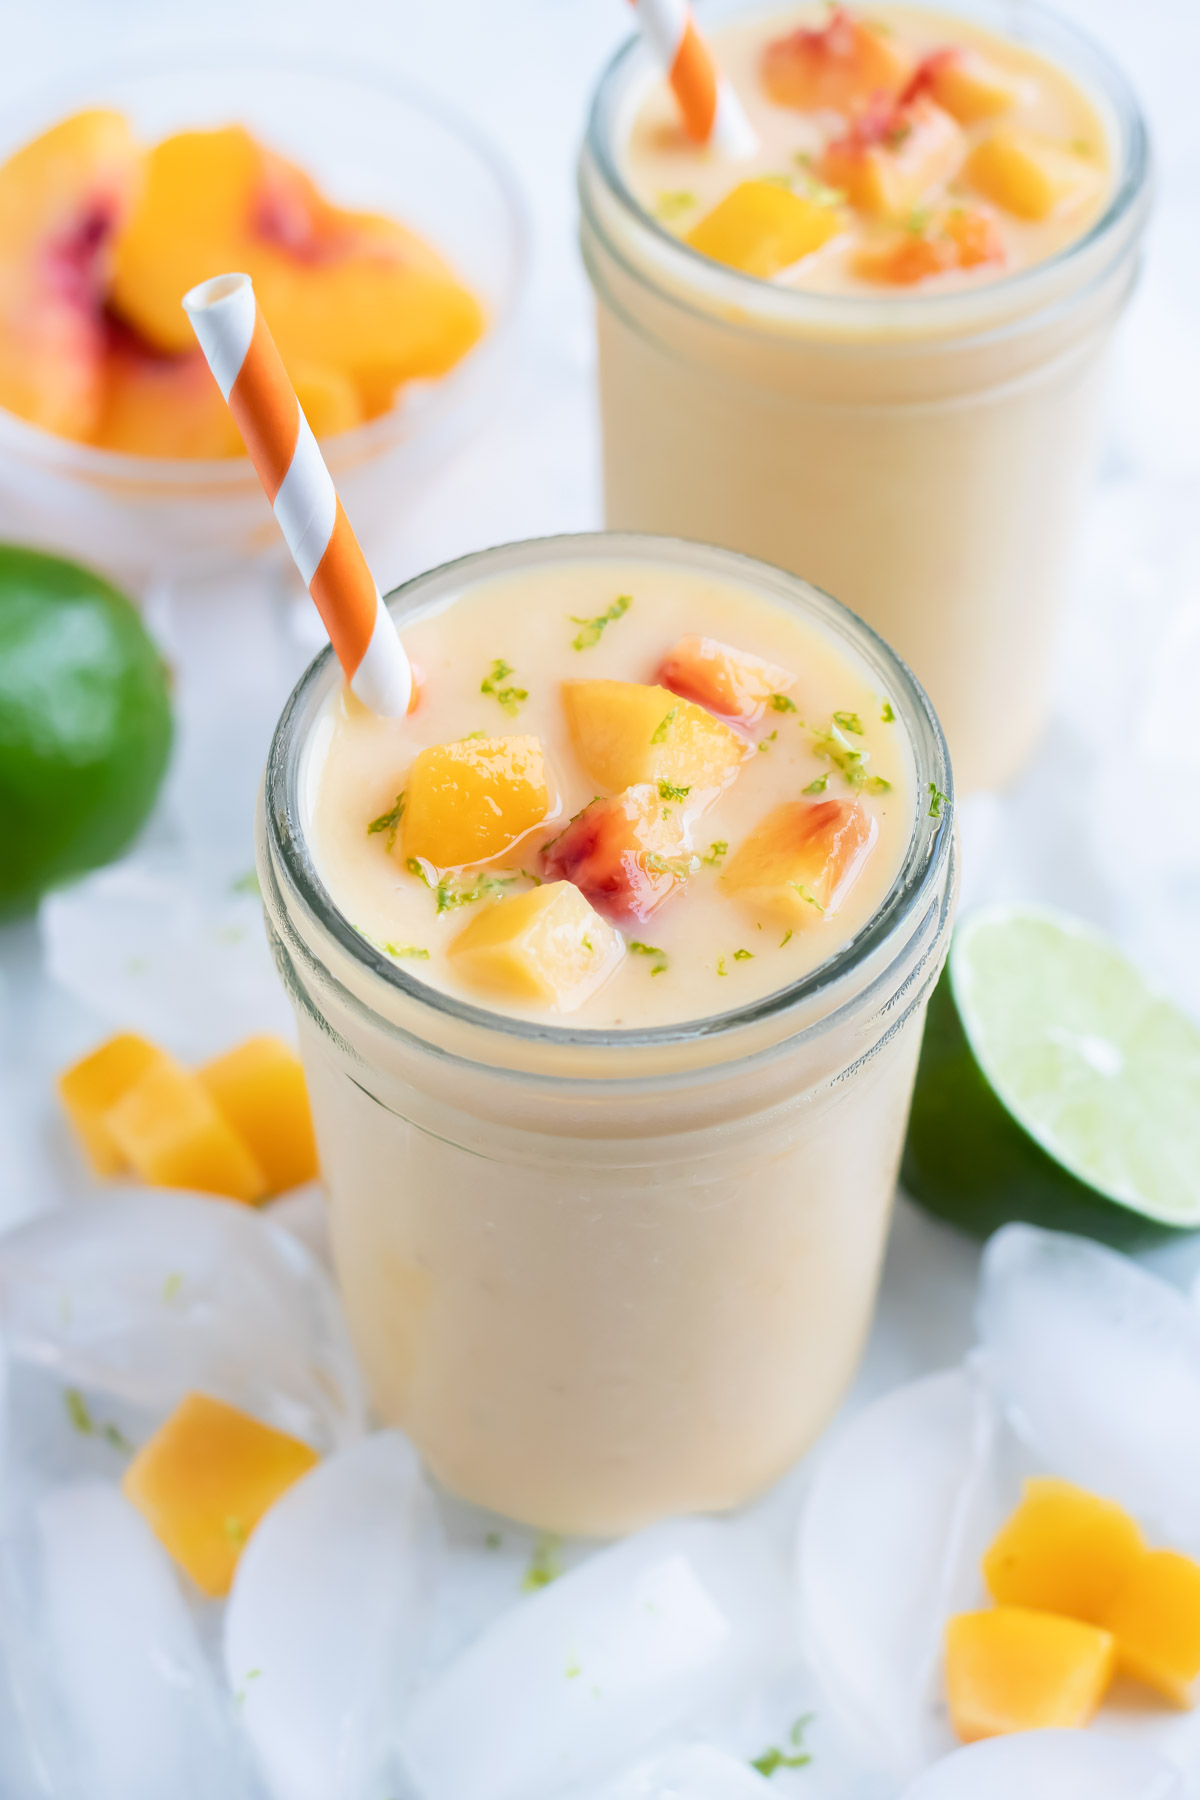 Two glasses of peach smoothies are shown for a healthy breakfast drink.